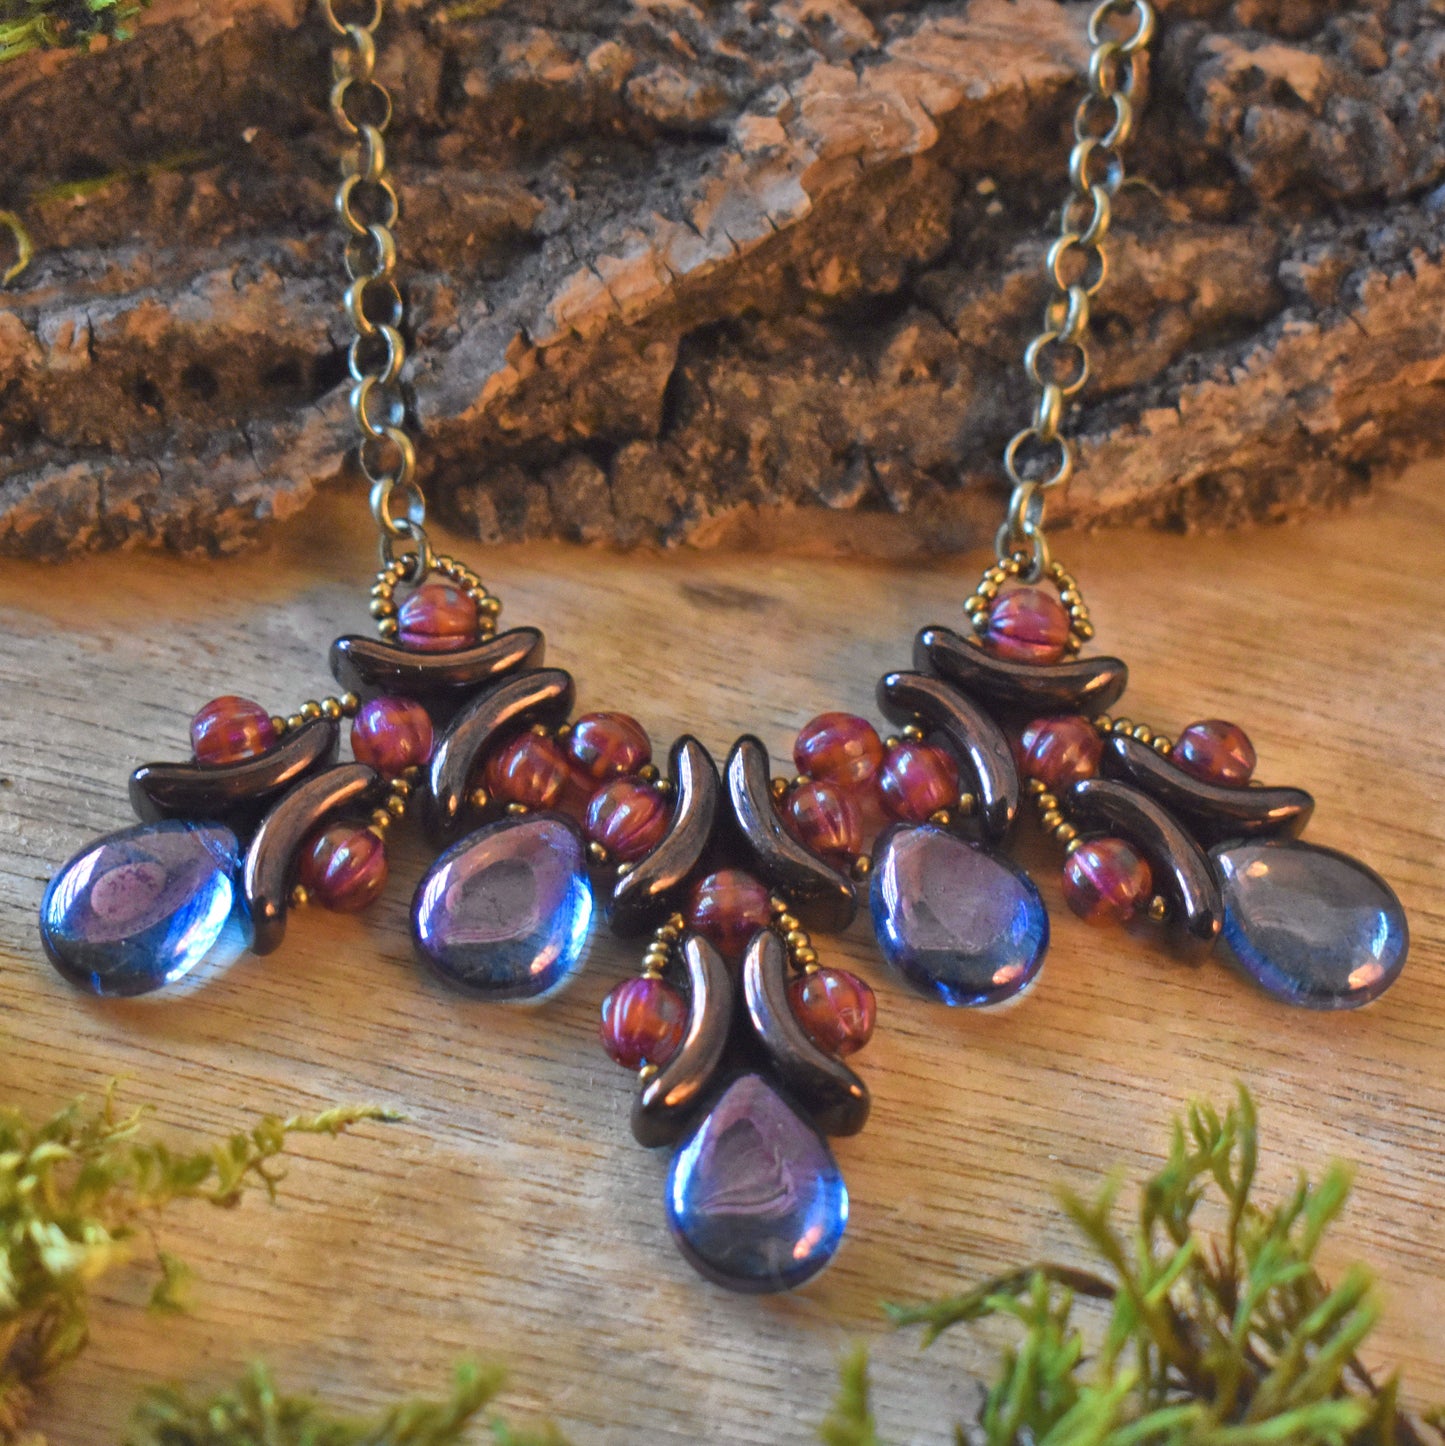 A necklace with a wide collar style pendant lays on top of a wood background. in the foreground are bits of bright green moss. The necklace is three sections formed from dark bronze crescent beads woven together with cranberry red rounds. At the end of each section is a purple-blue teardrop bead. Between each section is another teardrop.